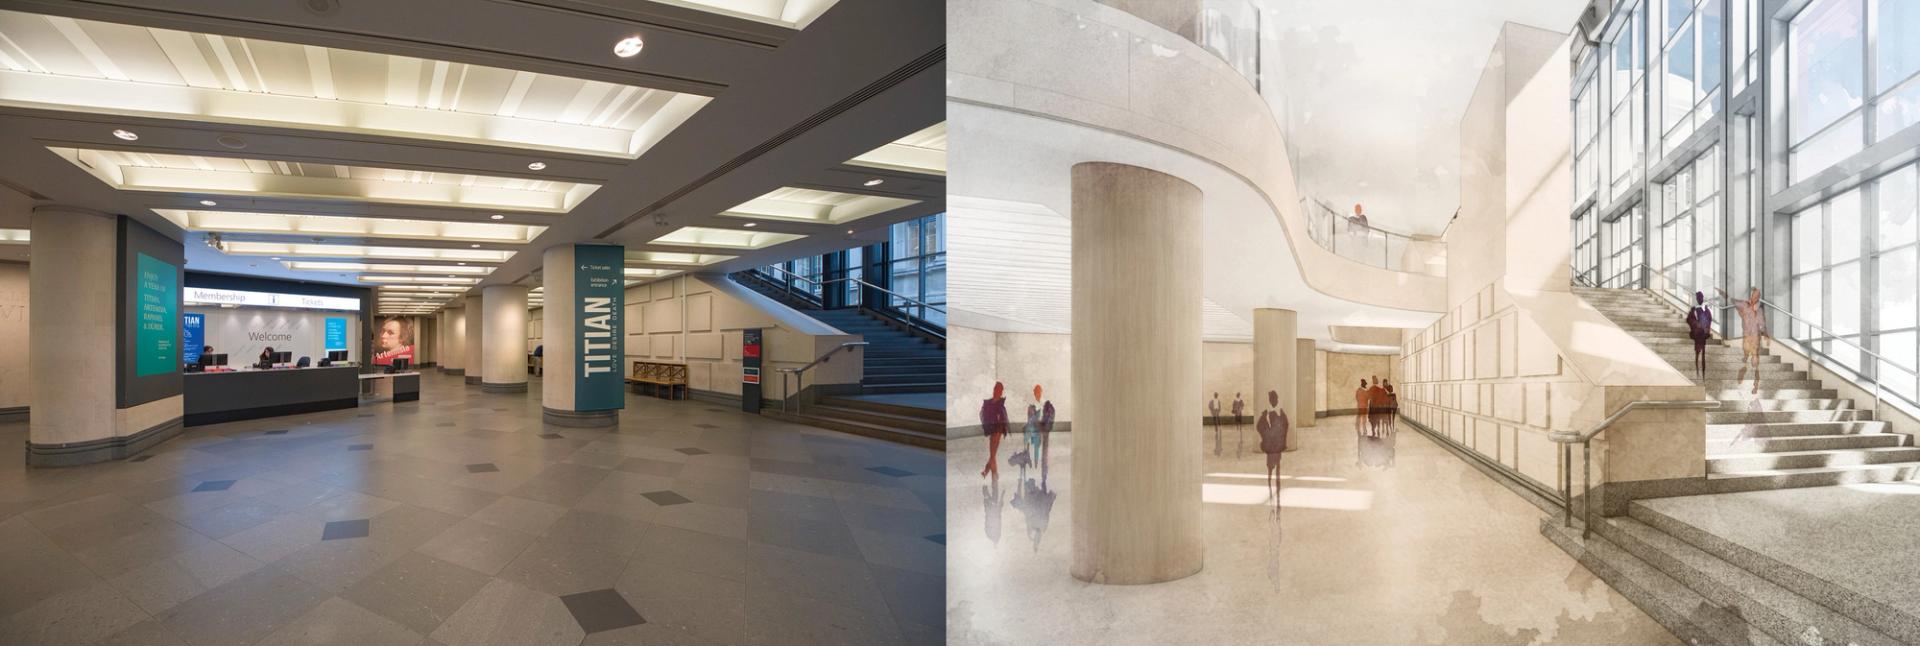 Left: the existing entrance foyer of the Sainsbury Wing at the National Gallery, designed by Robert Venturi and Denise Scott Brown. Right: Selldorf Architects’ proposals for the same space. Current foyer: © The National Gallery, London. Design proposals: © Selldorf Architects